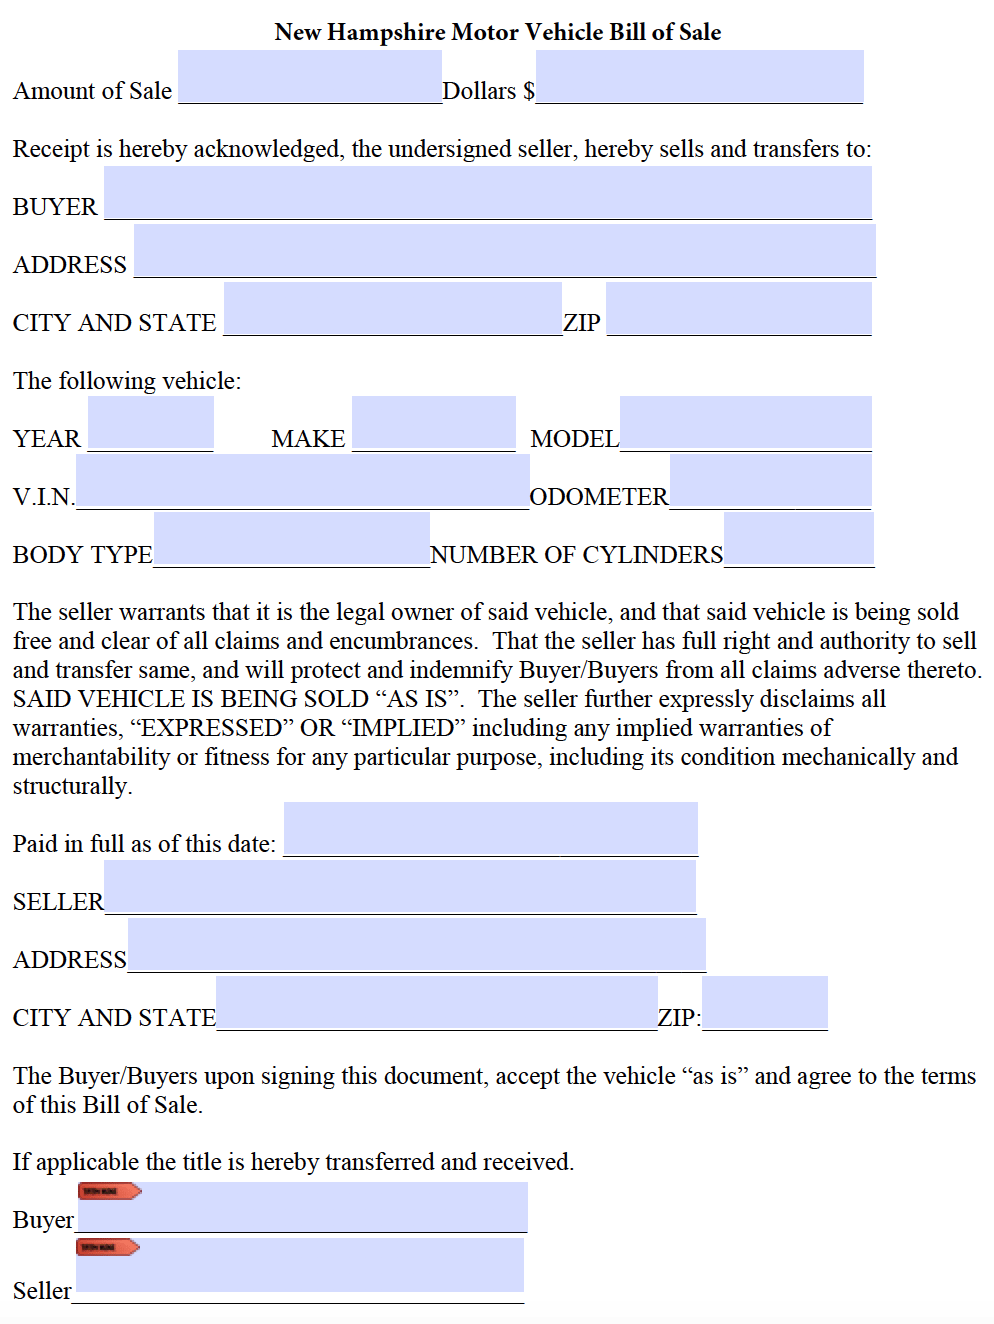 Automotive Bill Of Sale Template from freeforms.com